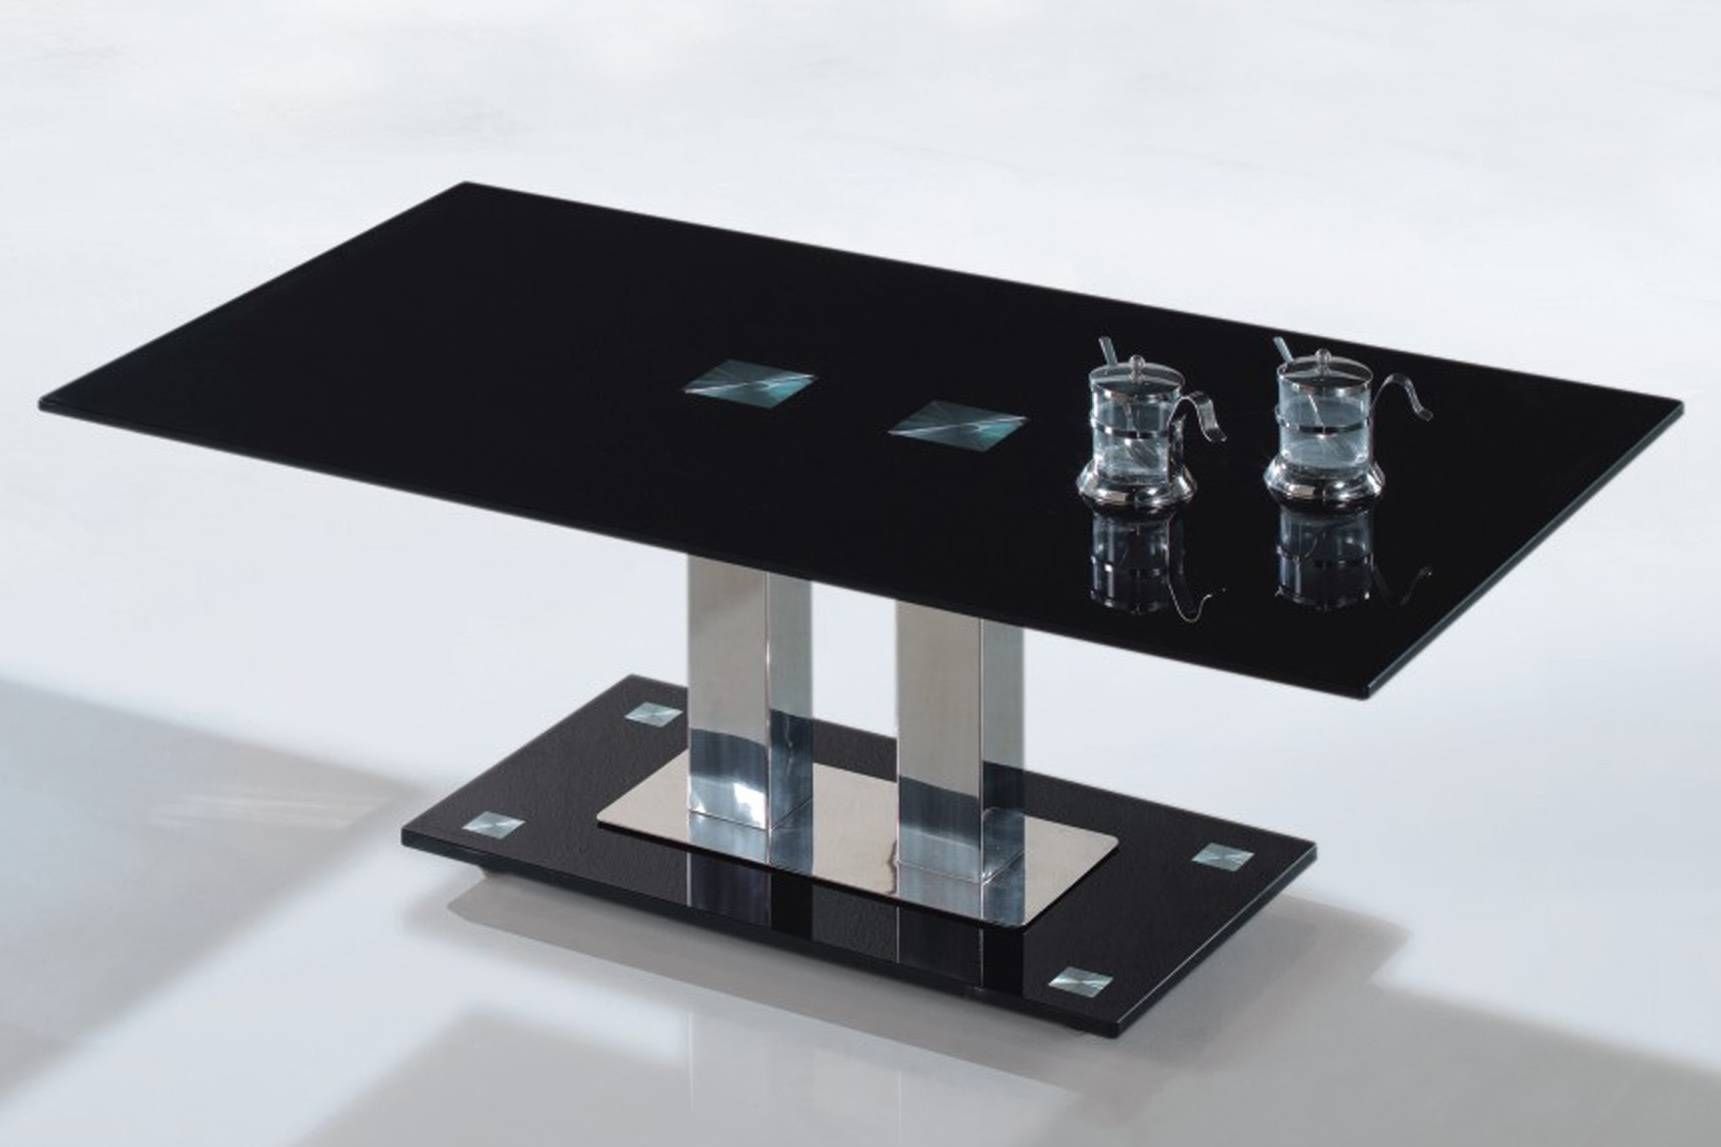 Glass Coffee Tables: Astounding Modern Small Black Glass Coffee Inside Modern Black Glass Coffee Table (View 13 of 15)